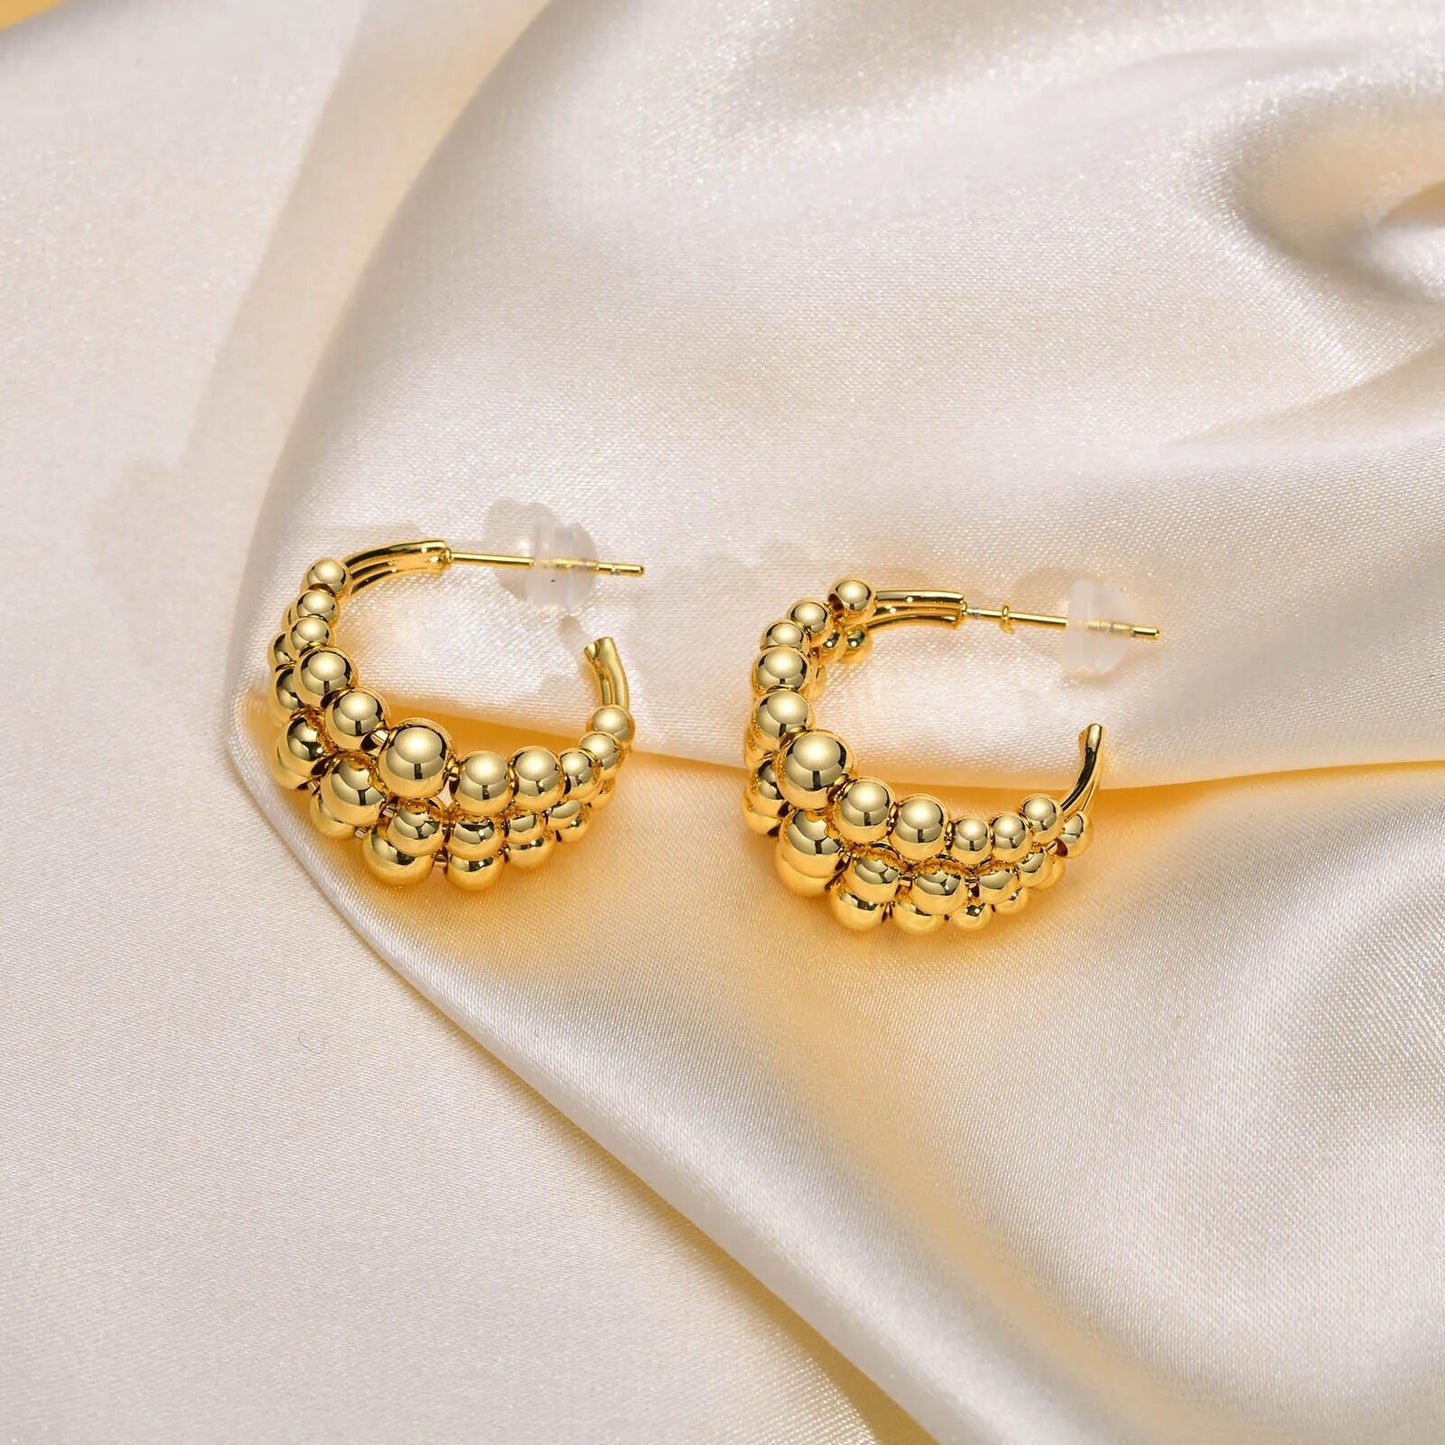 Women's Earrings Aretes para mujeres Chic Gold Color Beads Hoop Earrings for Women Party Gifts Jewelry, Three Layers Balls Link Ear Accessory